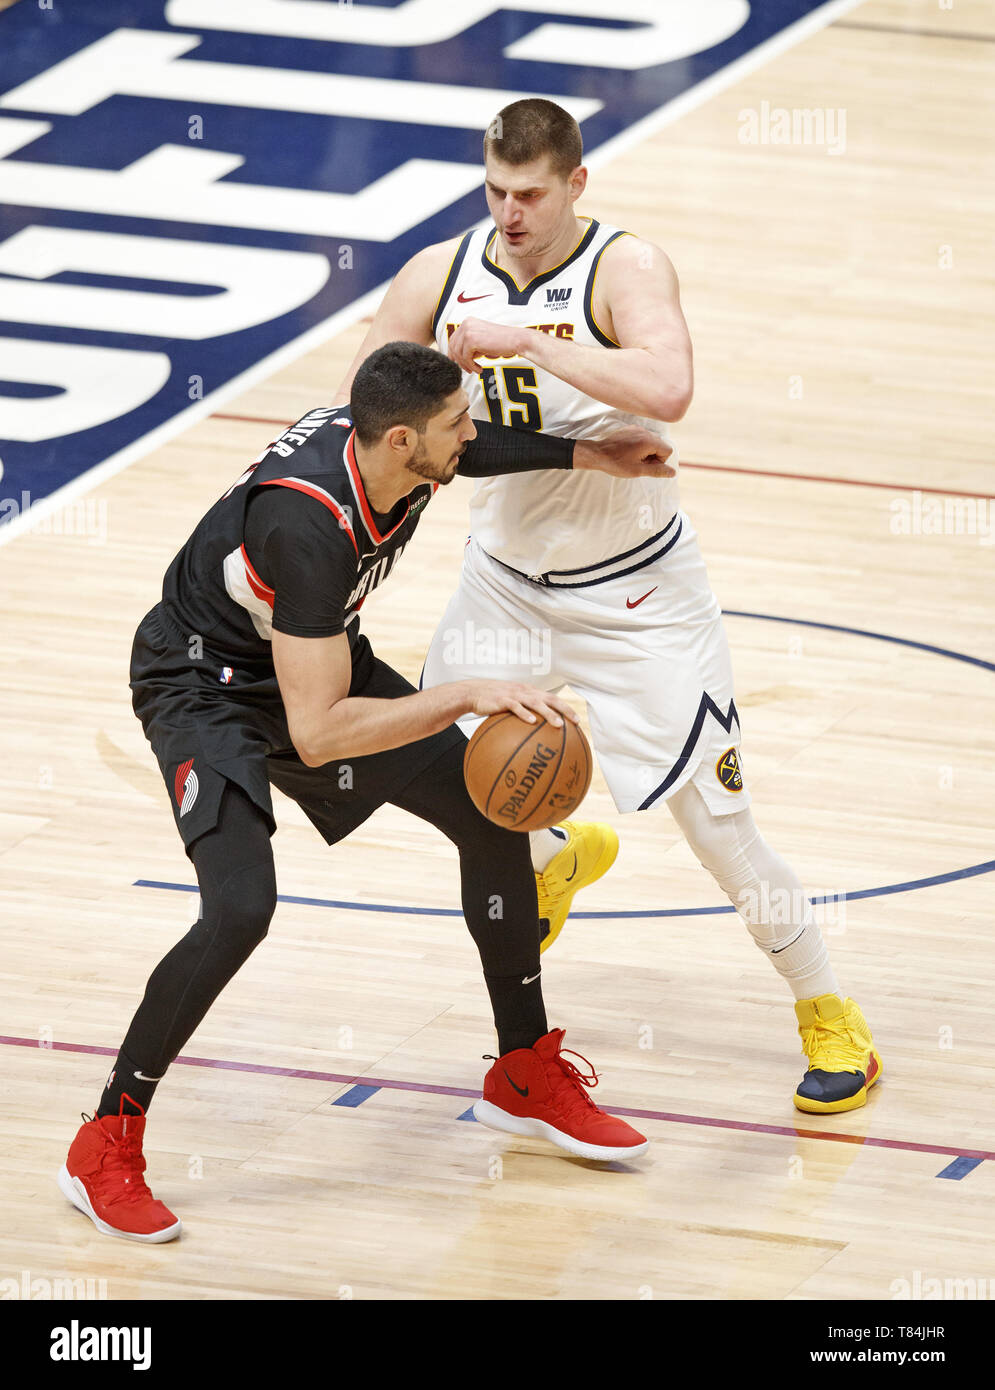 Denver, Colorado, USA. 7th May, 2019. Nuggets NIKOLA JOKIC, right, defends against Trail Blazers ENES KANTER, left, during the 1st. Half at the Pepsi Center Tues. night. The Nuggets beat the Trail Blazers 124-98. Credit: Hector Acevedo/ZUMA Wire/Alamy Live News Stock Photo